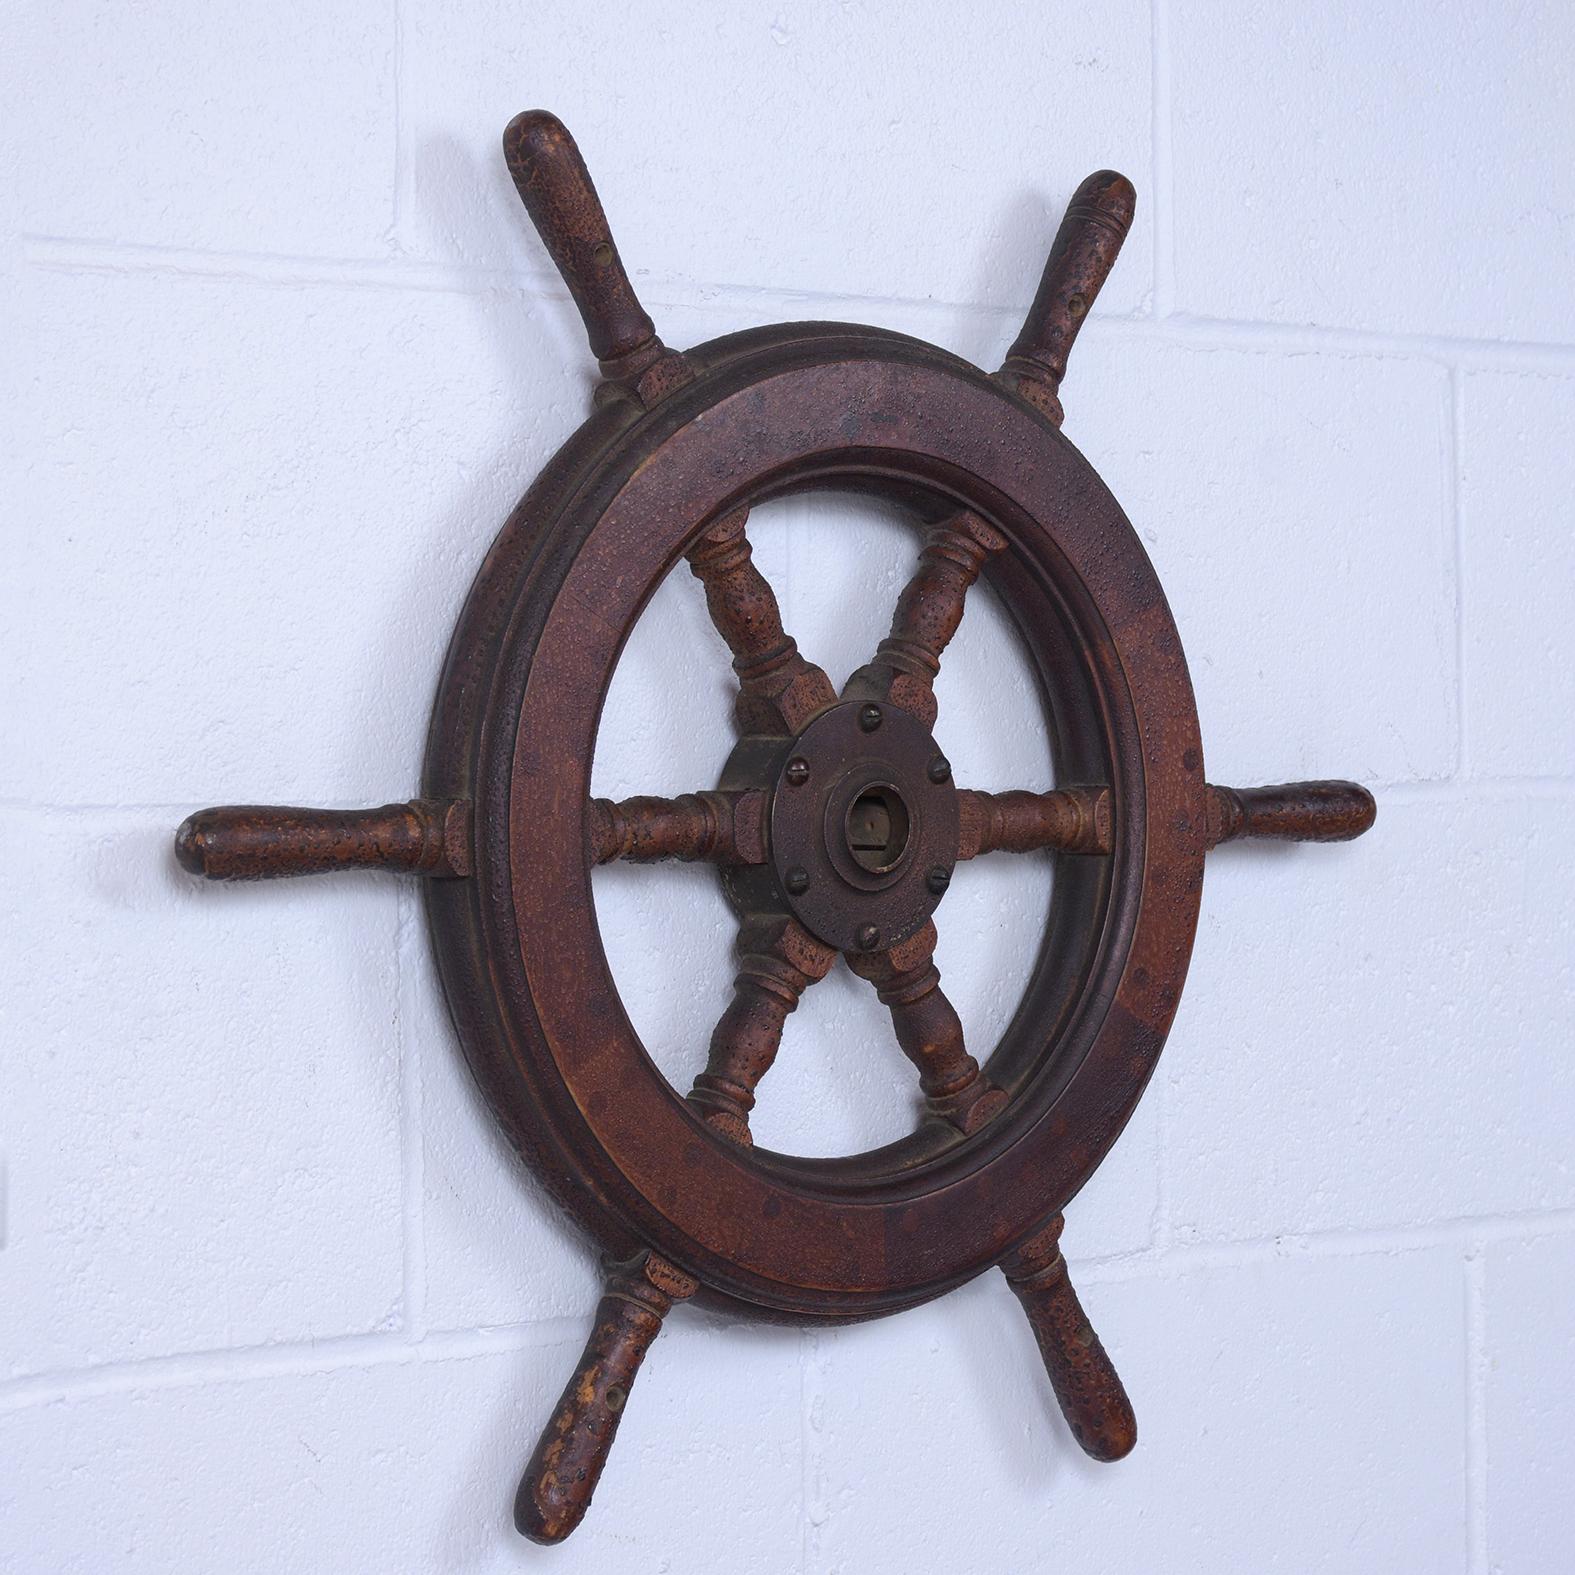 A handcrafted ship wheel is in great condition, comes with six spokes, an iron hub, This eye-catching decorative accent piece is ready to be displayed for years to come.